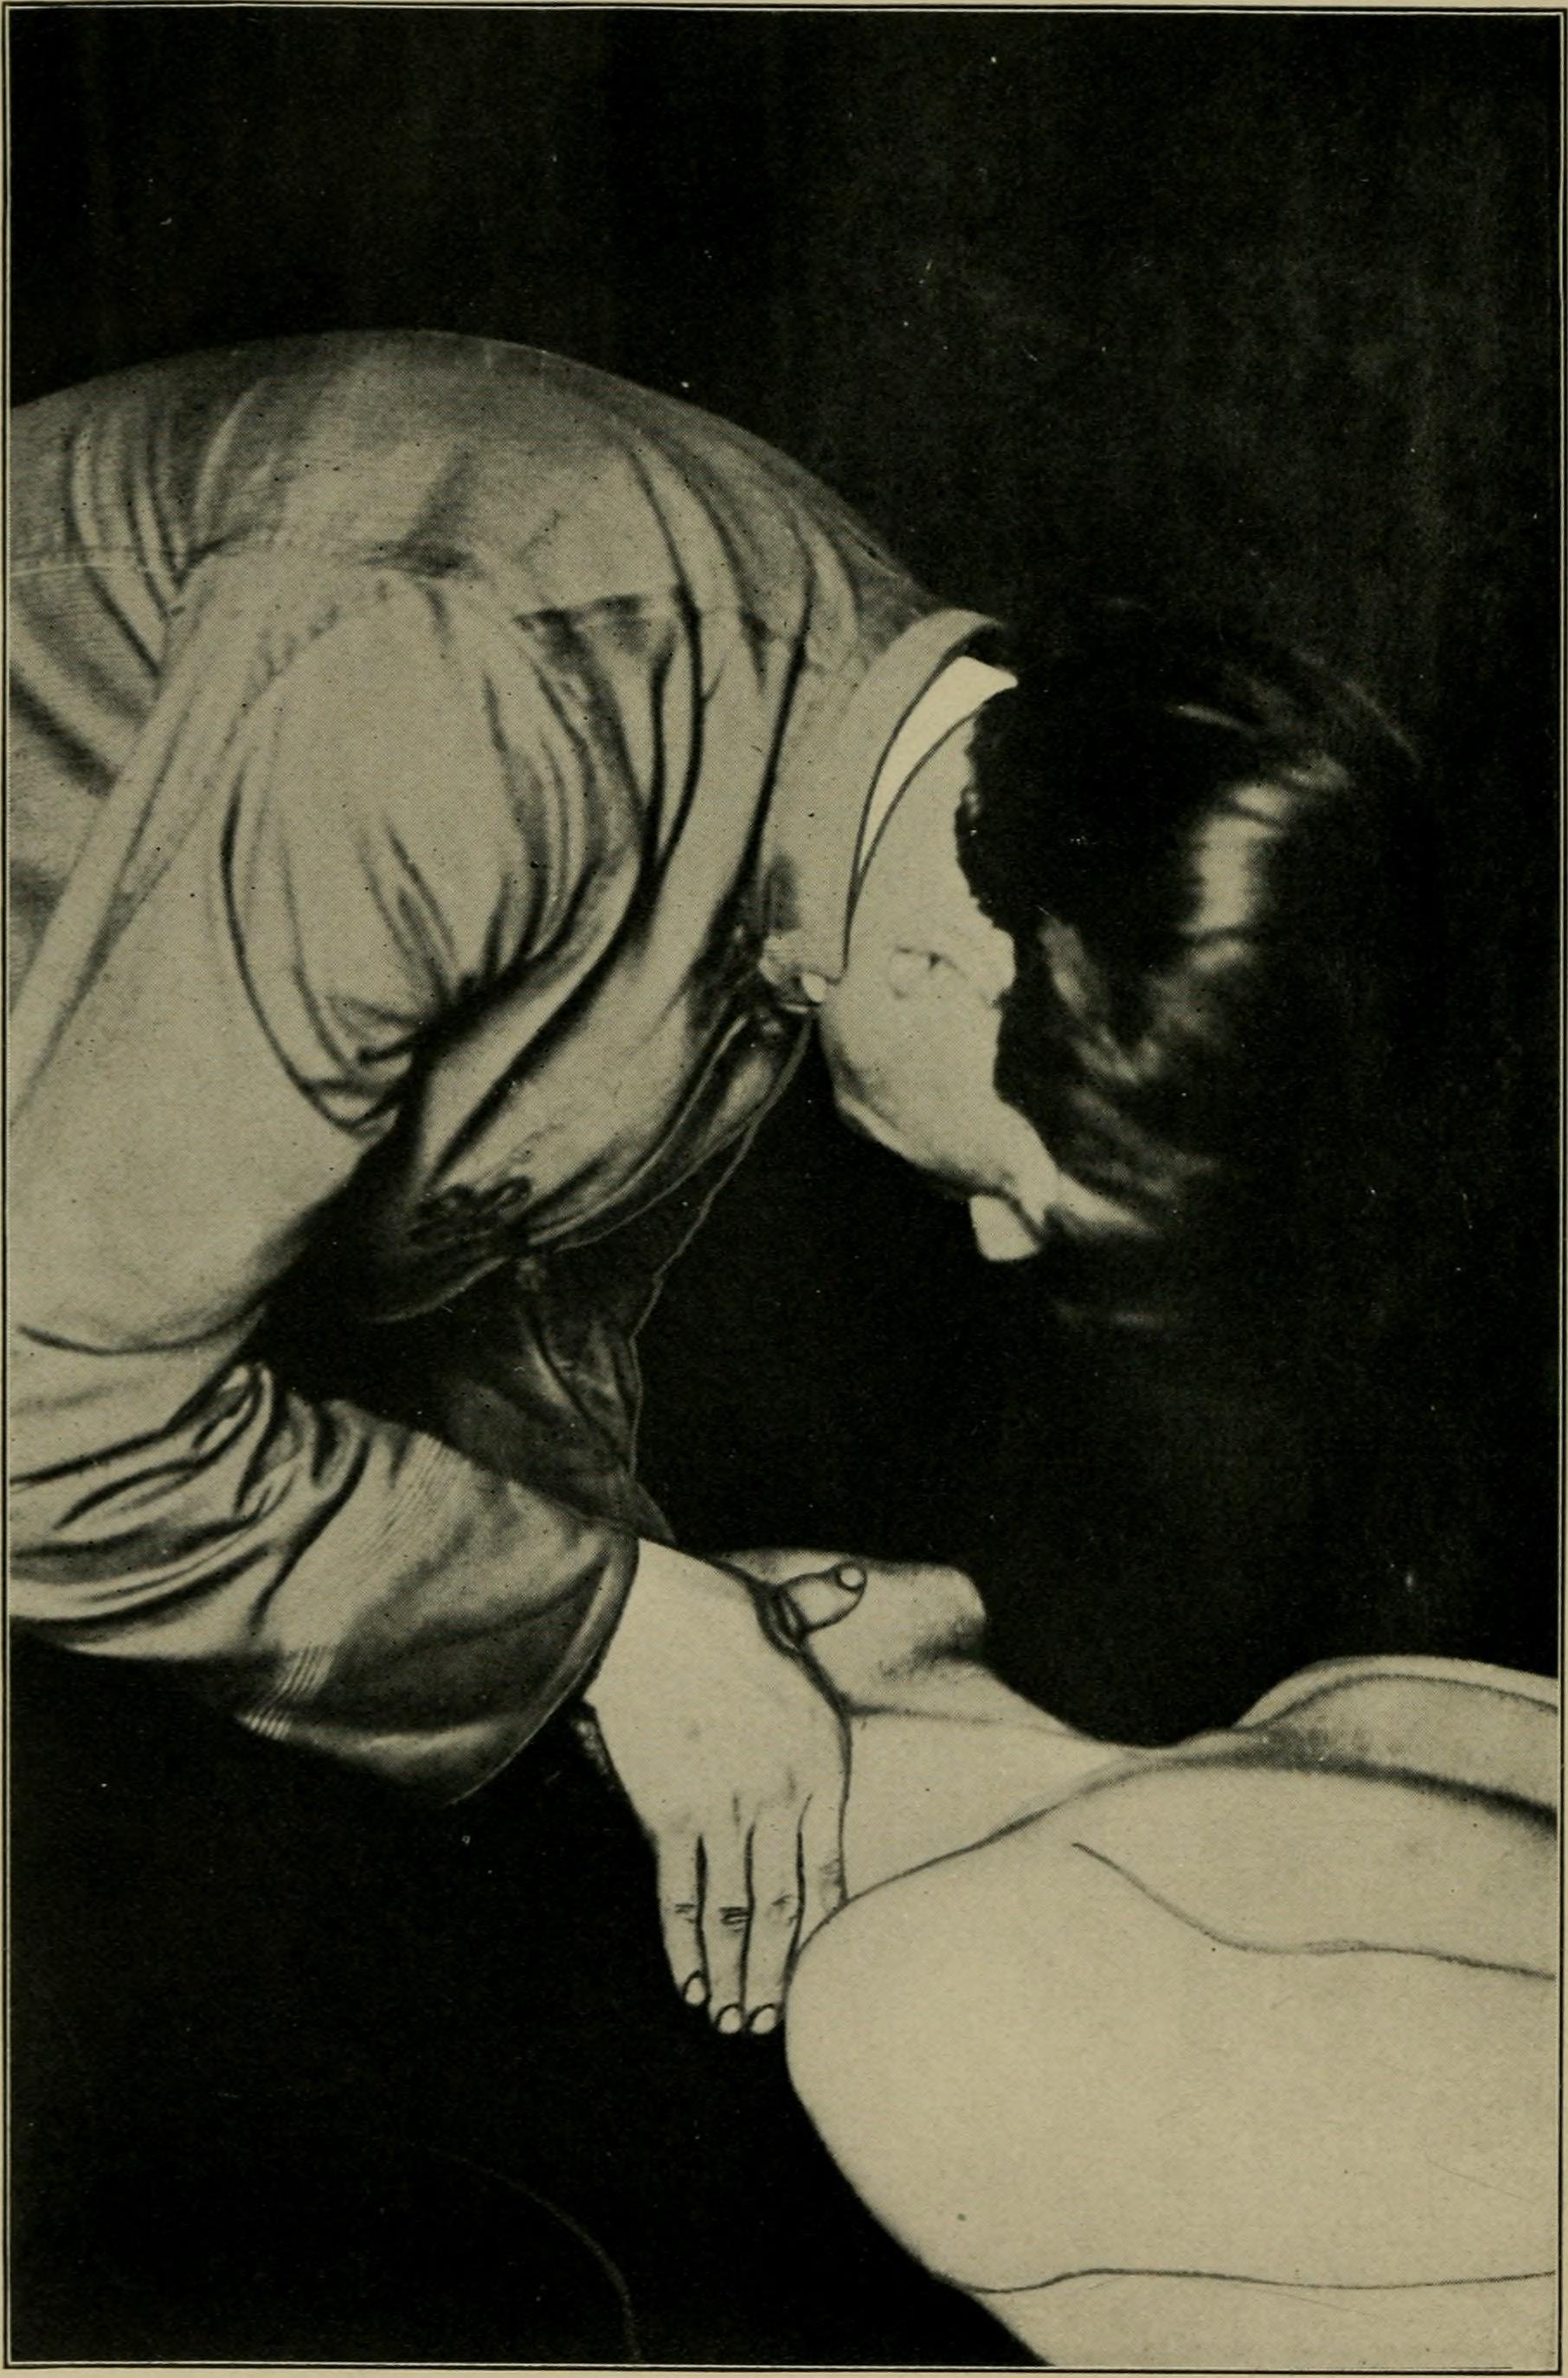 Image from page 139 of "Technic and practice of chiropractic" (1915)